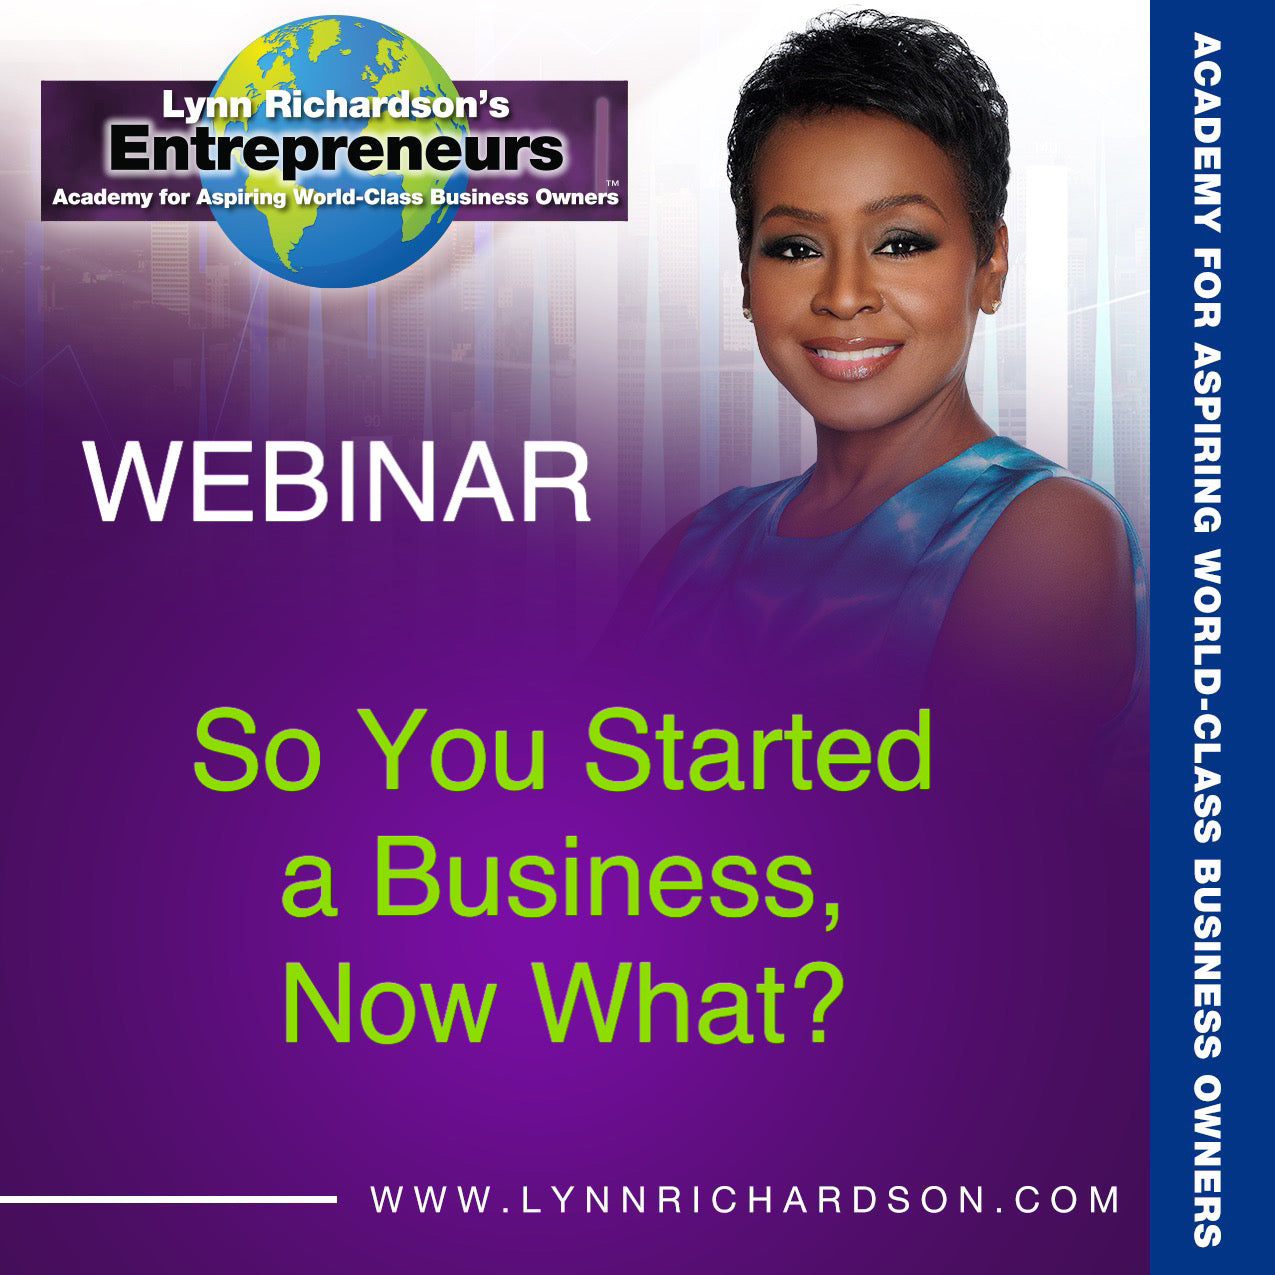 So, You Started a Business, Now What?